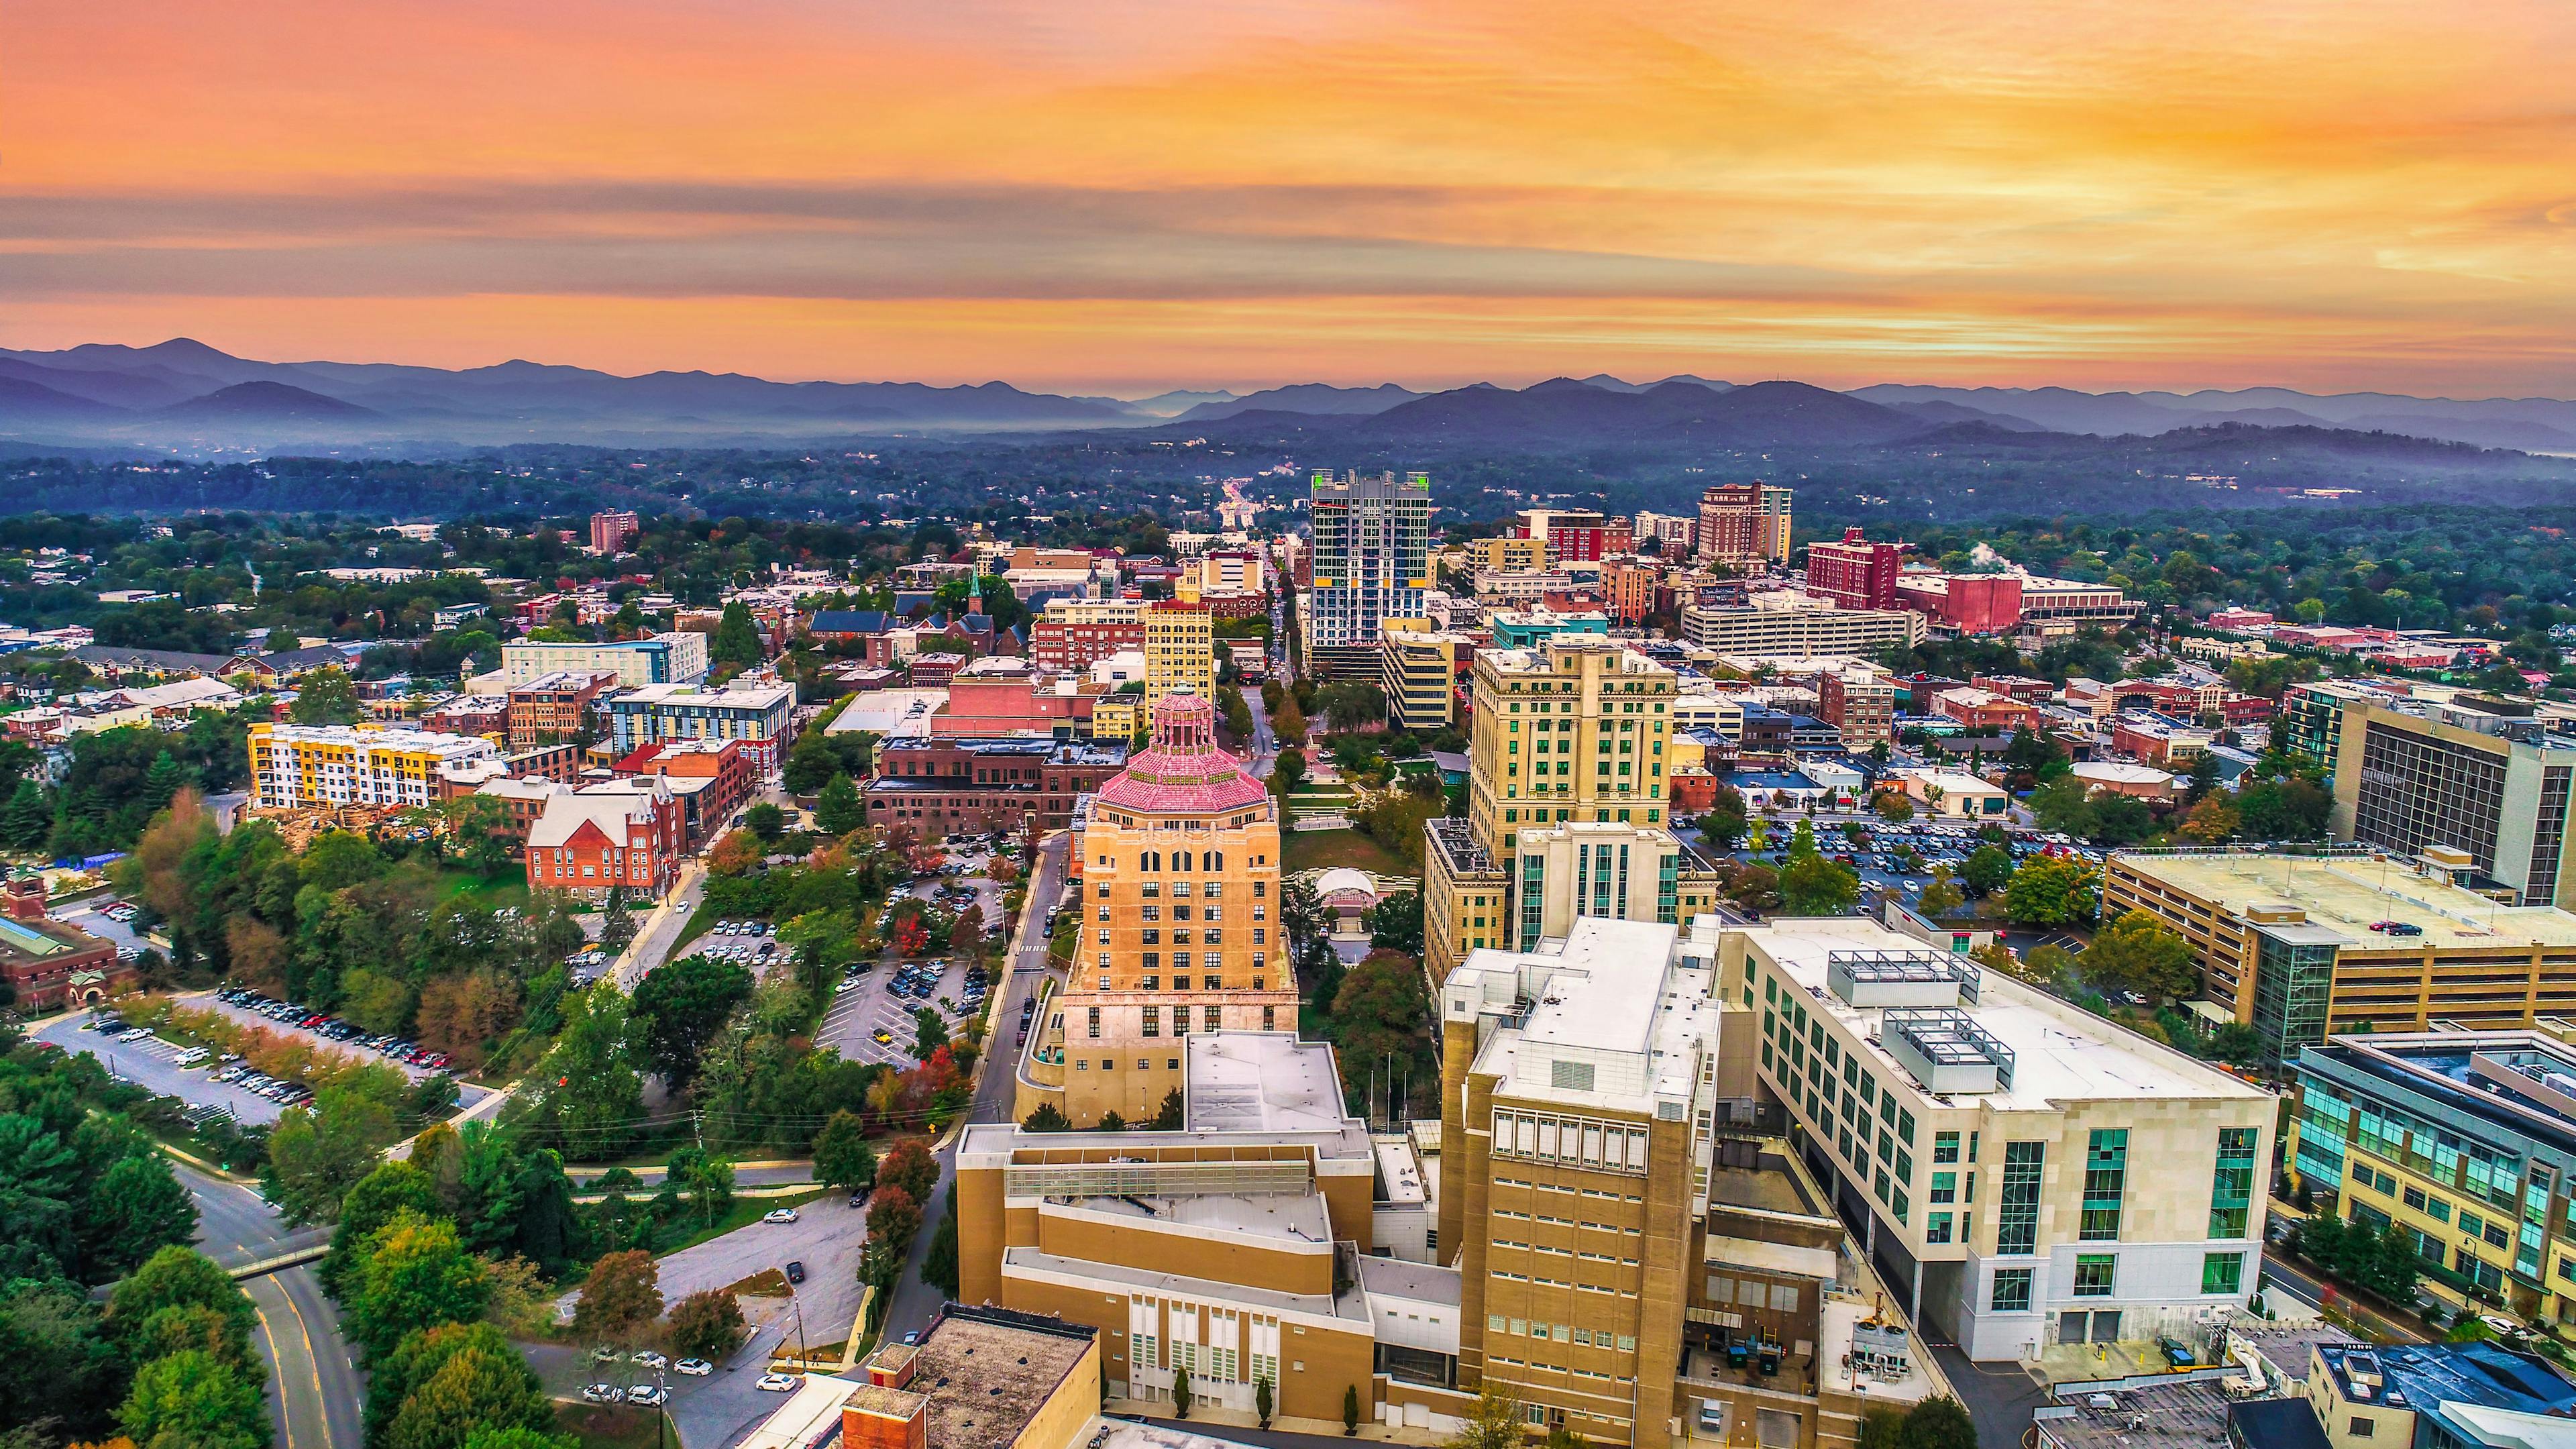 Plan Your Trip: What to do While Visiting Asheville